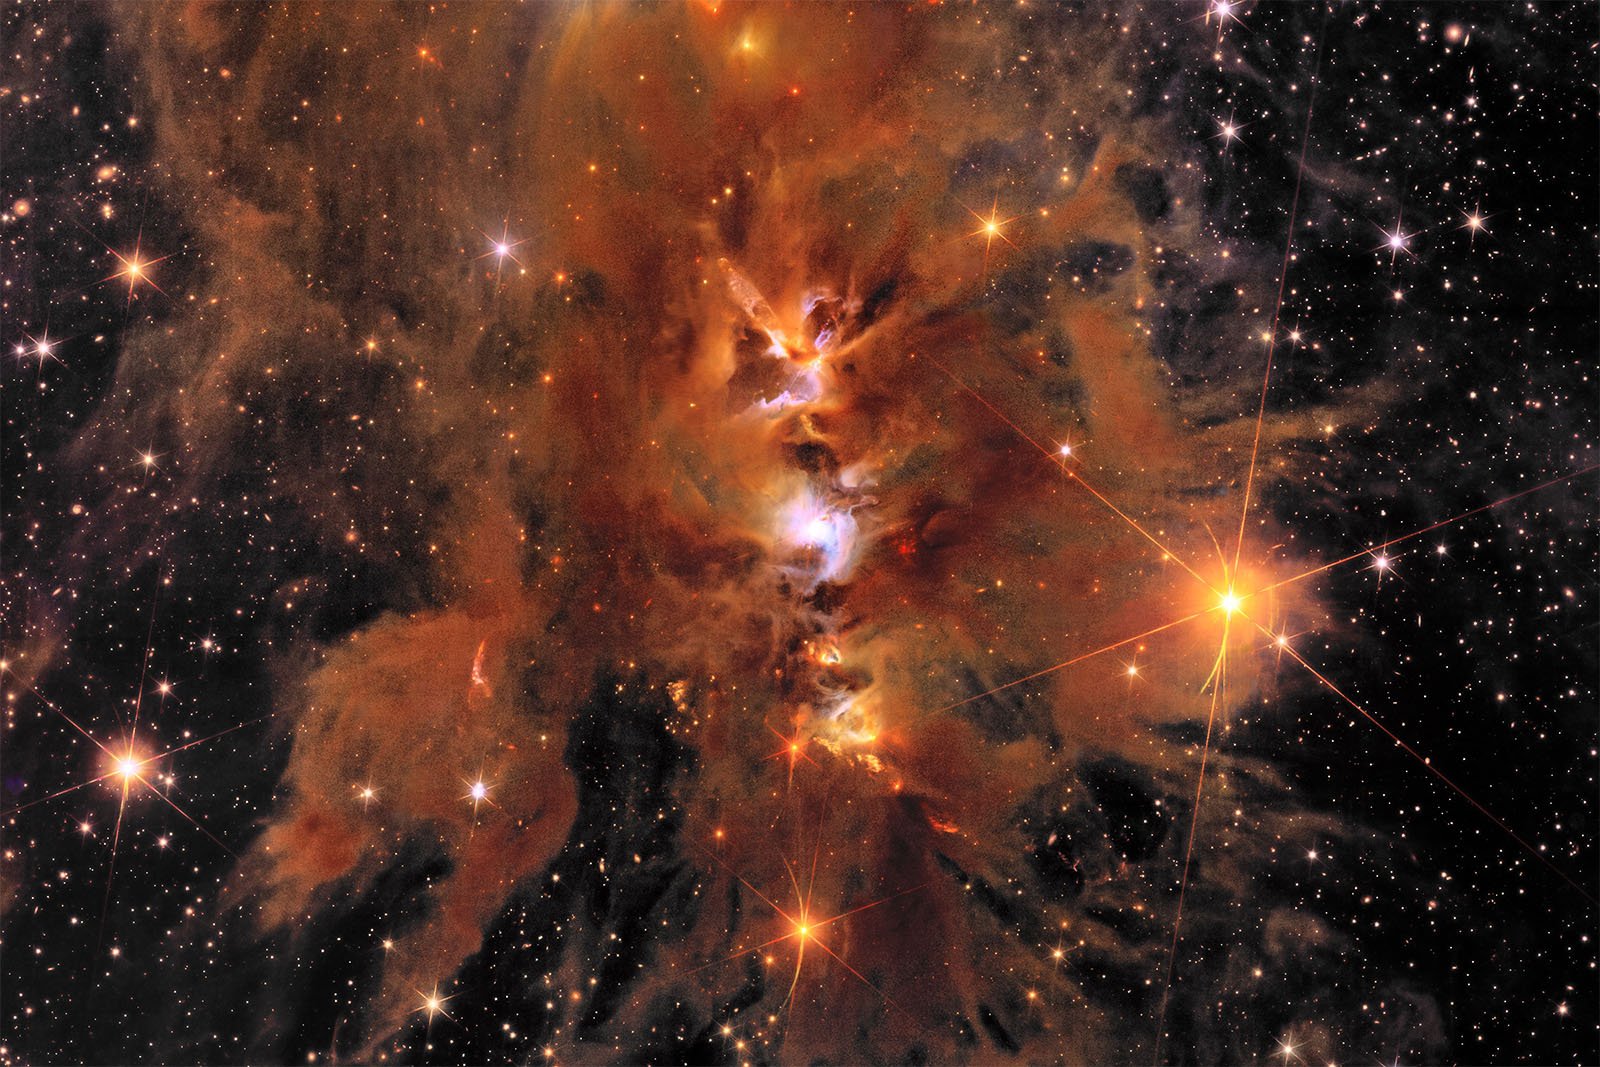 A vibrant, colorful nebula with a mix of orange, red, yellow, and blue hues, surrounded by scattered stars of varying brightness. The nebula has a wispy, cloud-like appearance against the dark backdrop of space. Bright stars shine with light rays extending outward.